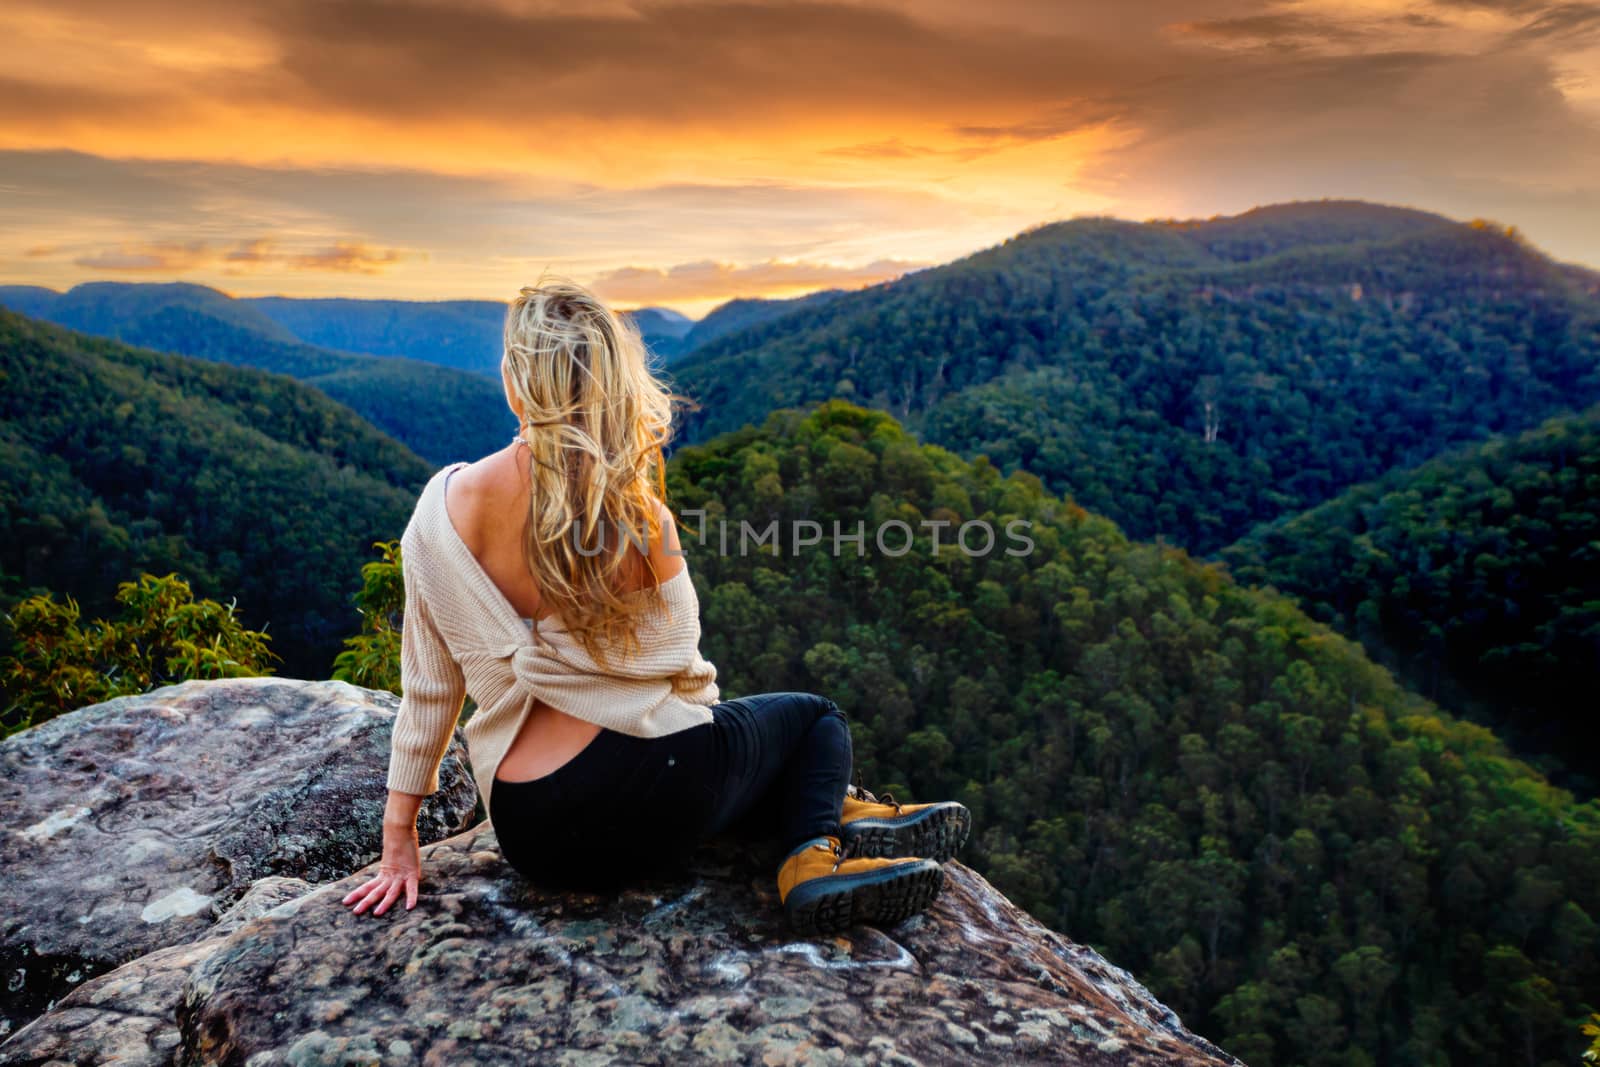 Woman sitting on a rock overlooking the valley, mountain gazing as the sun sets